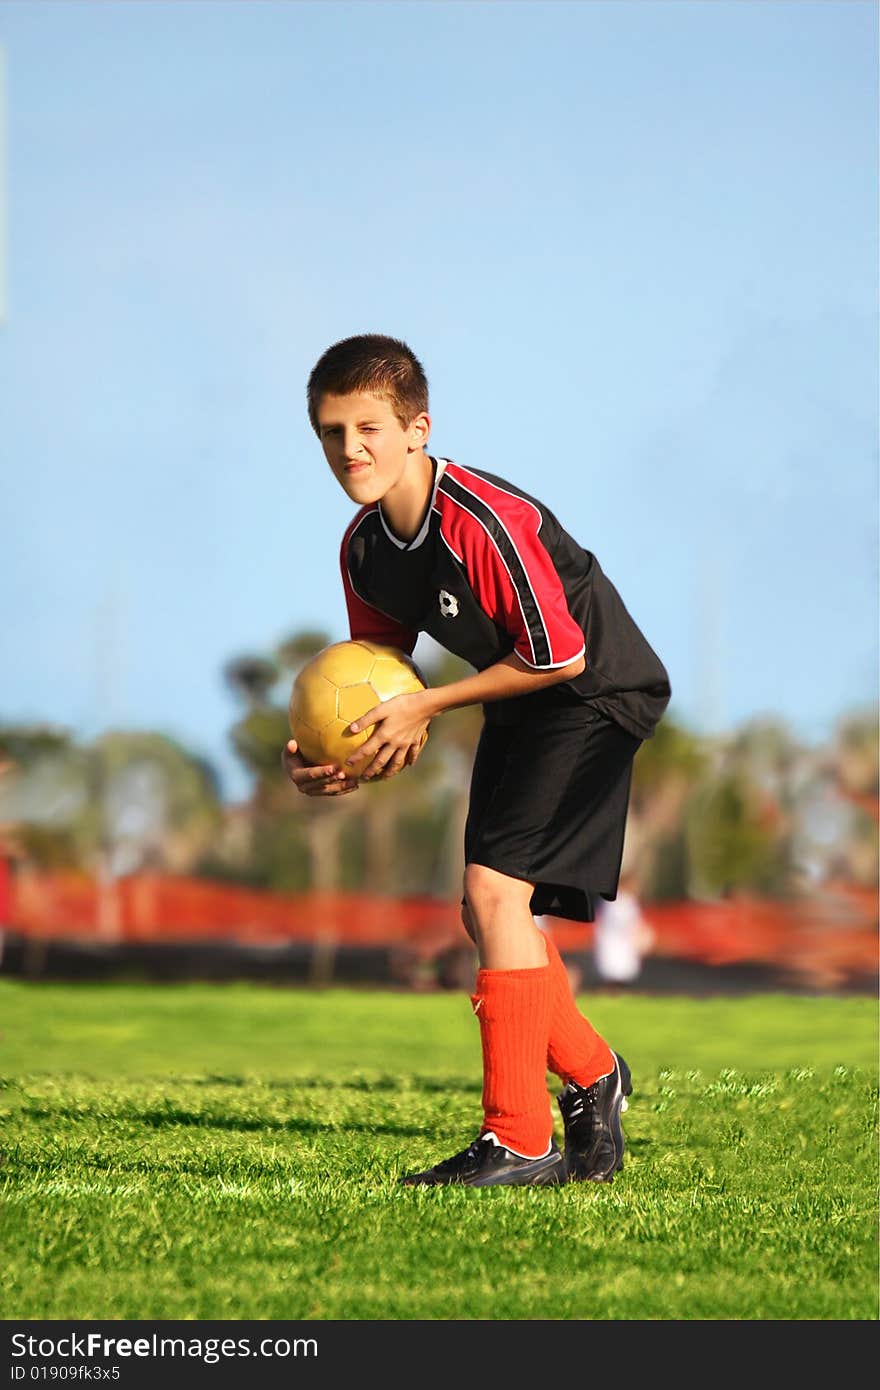 Youth Soccer player ready to kick goal